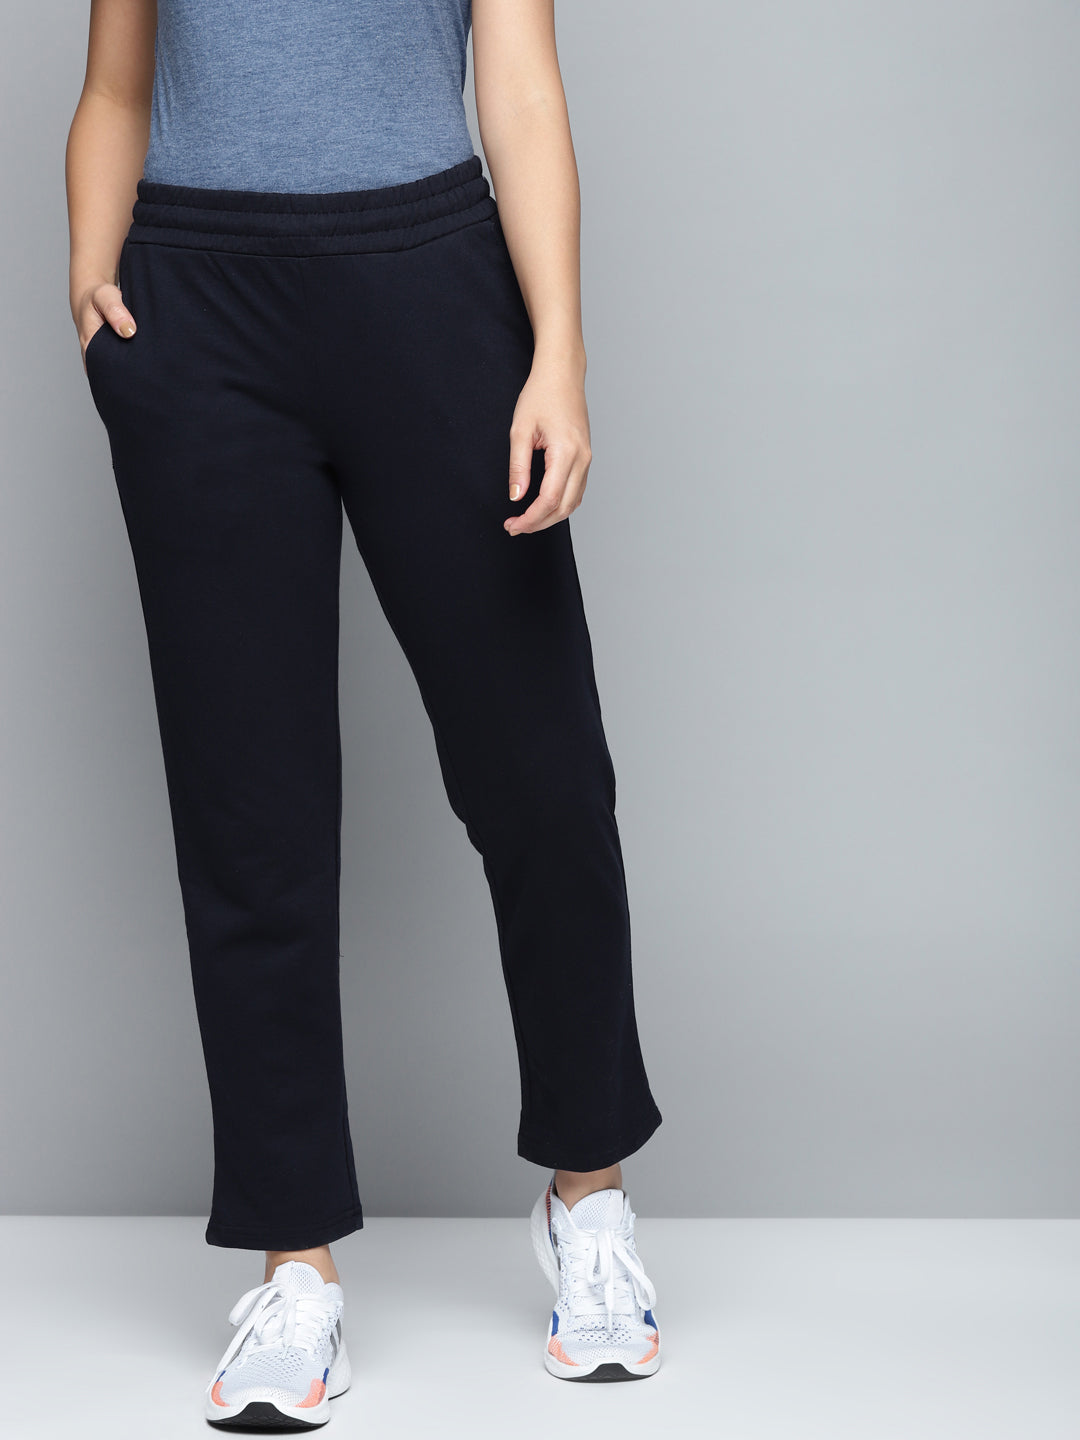 Alcis Women Navy Blue Solid Track Pants